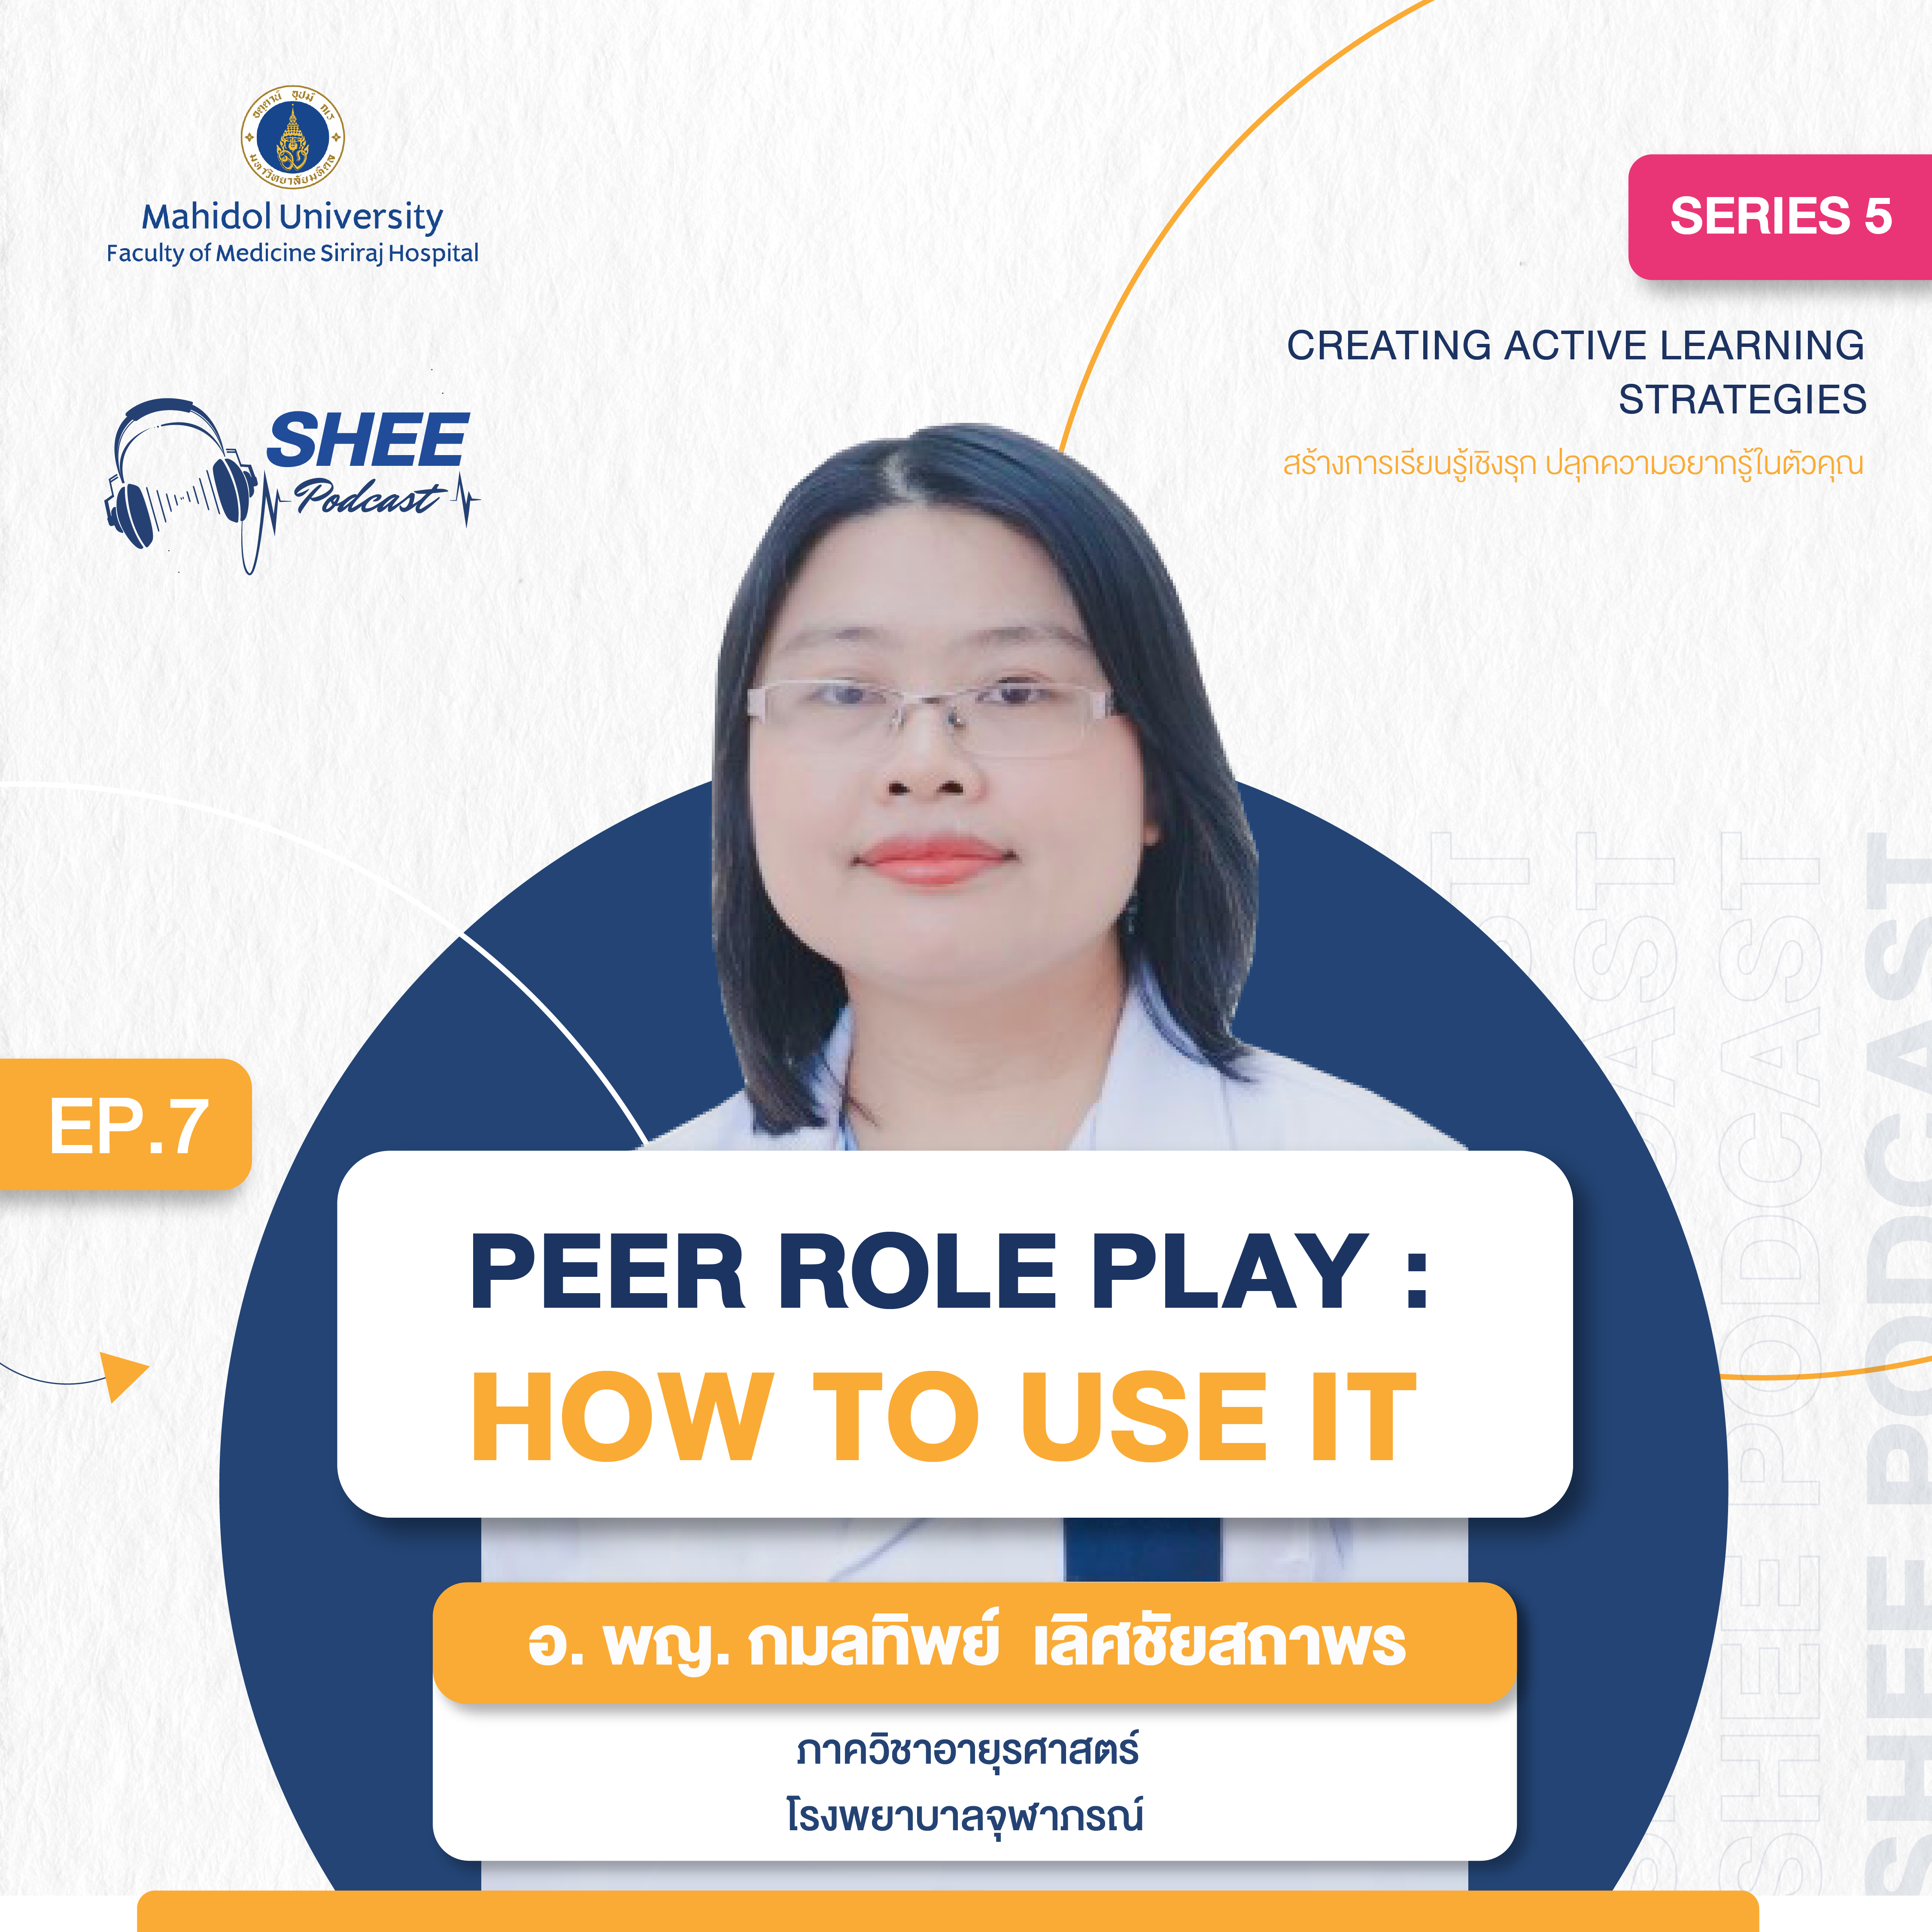 Episode 7 : Peer role play : How to use it